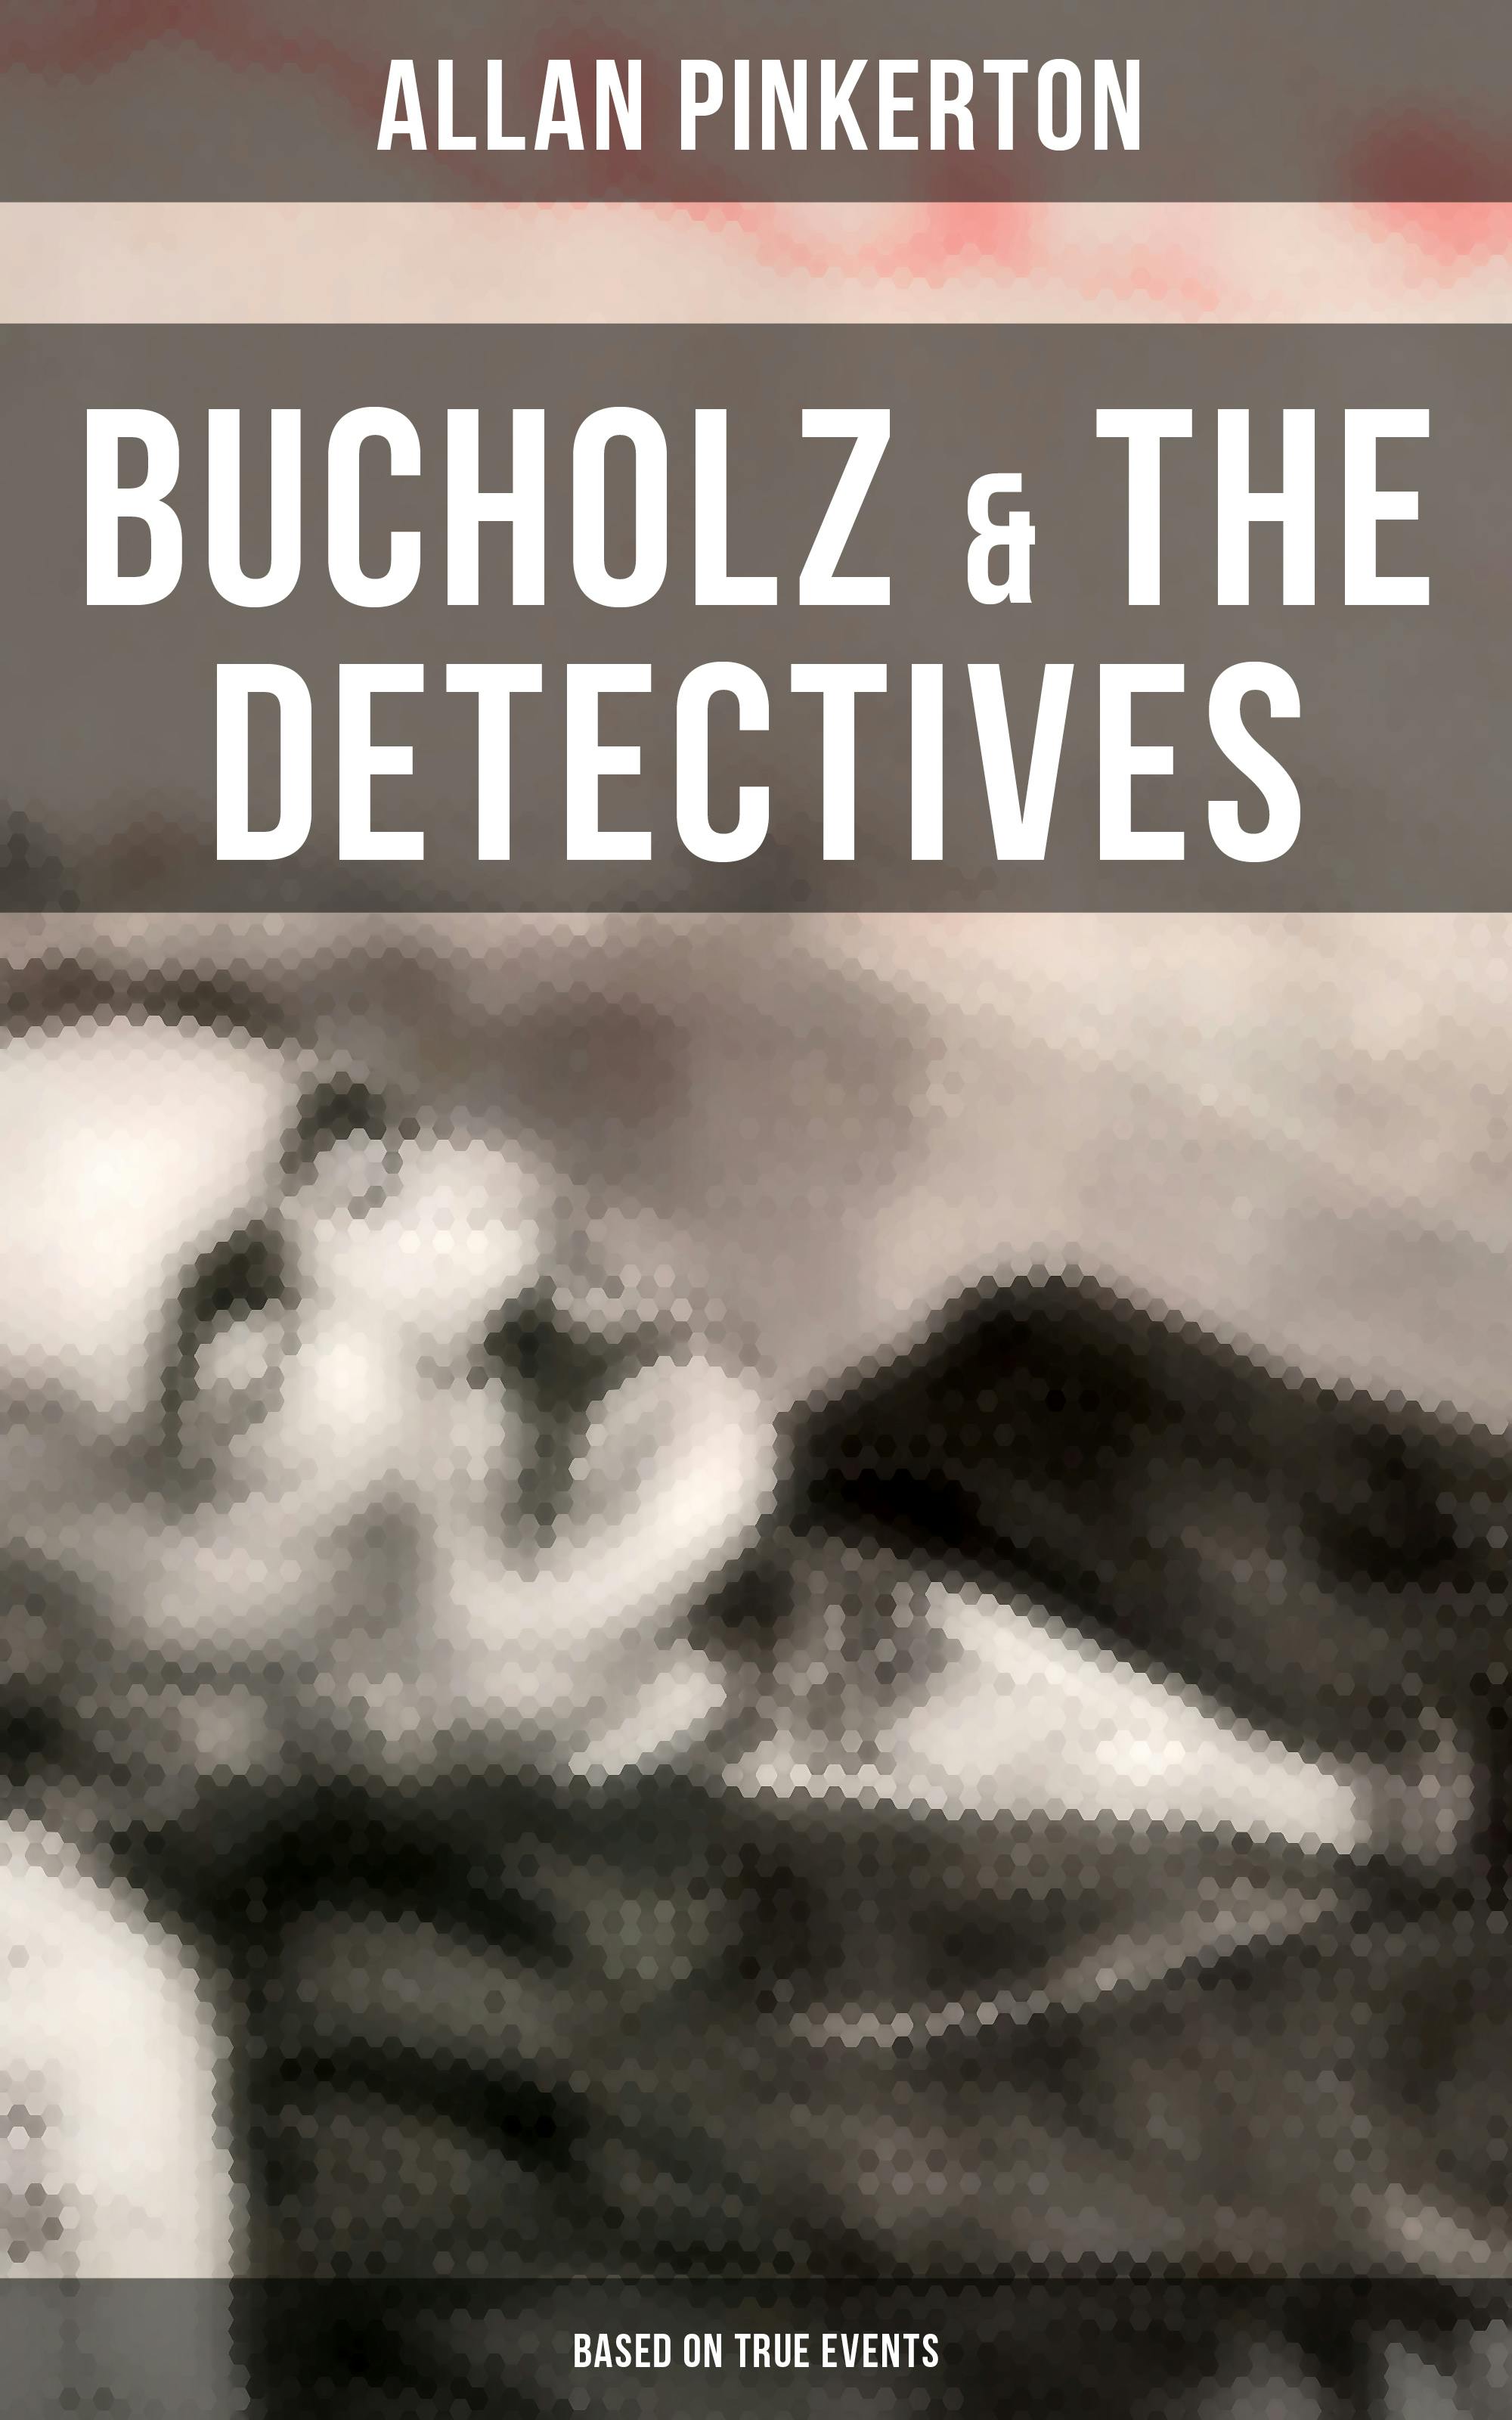 Bucholz & the Detectives (Based on True Events) - Allan Pinkerton